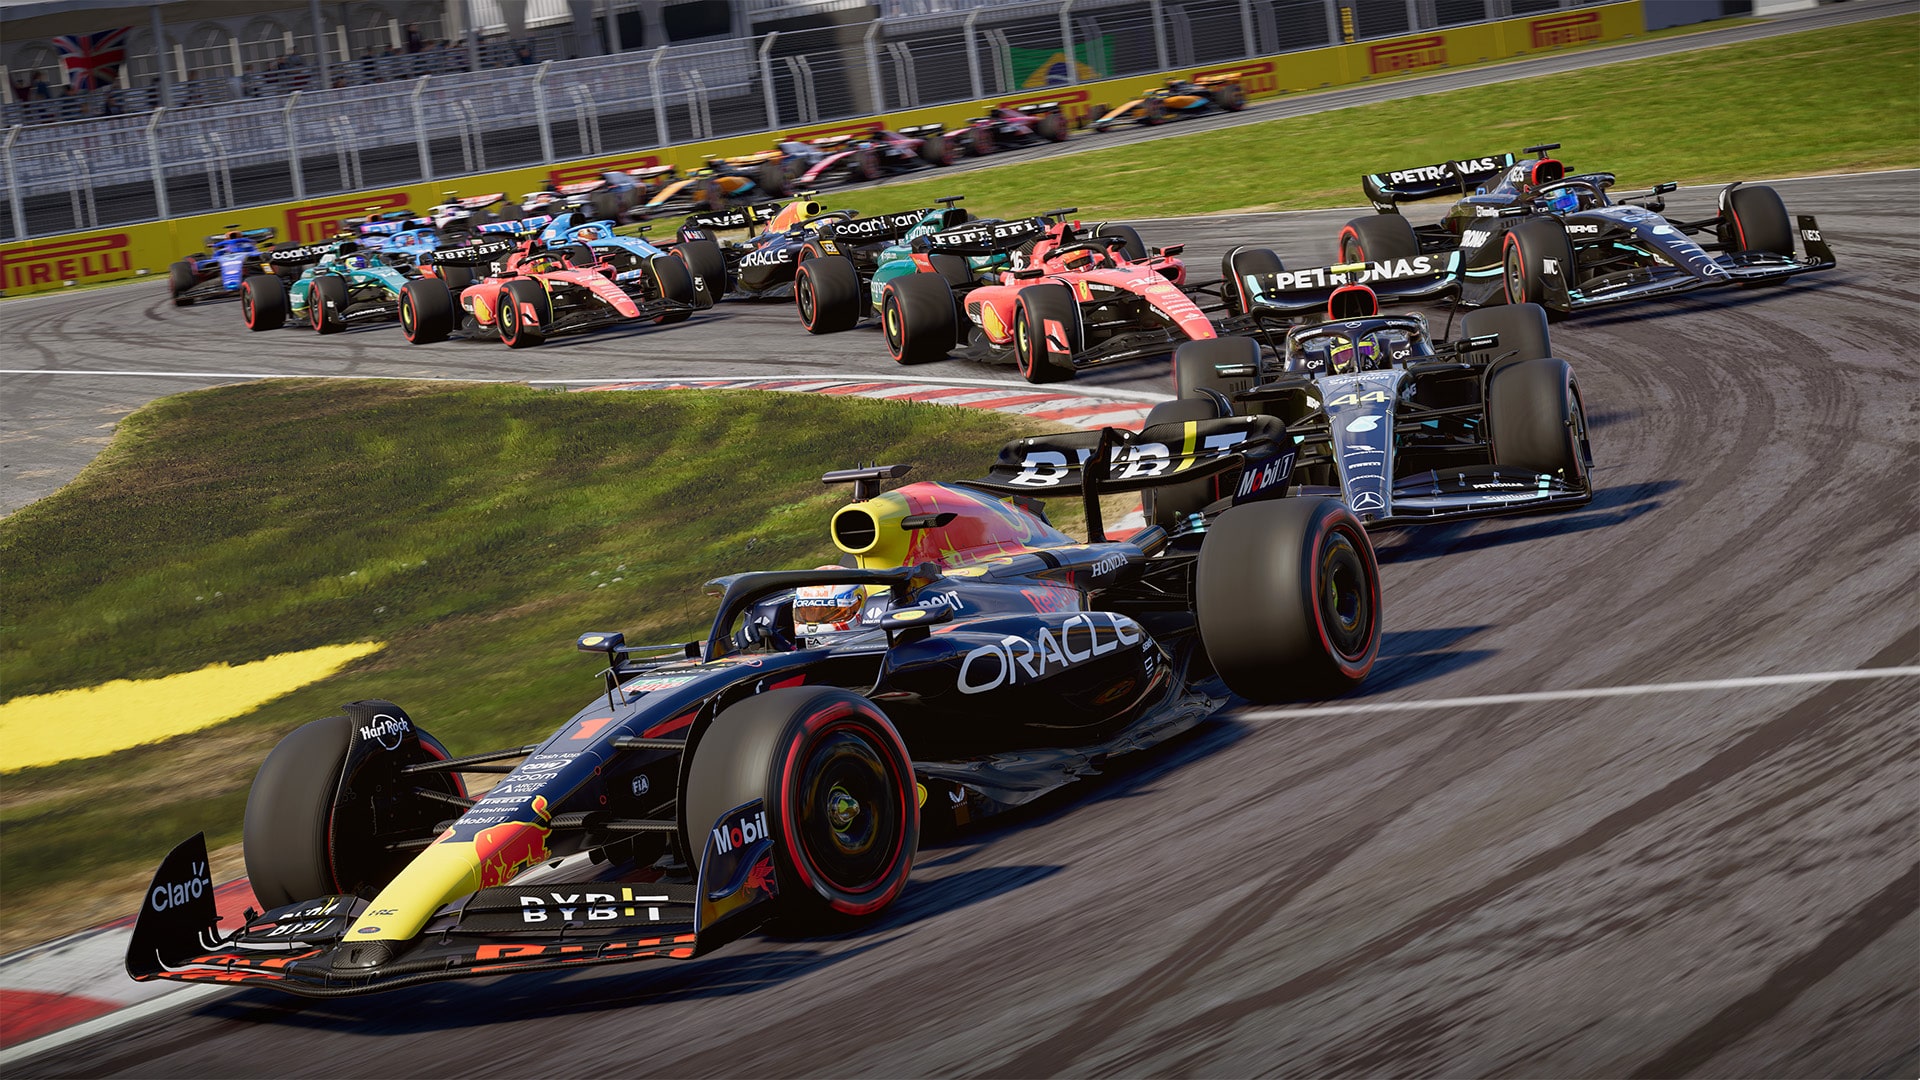 F1 23 REVIEW - New Formula One game leaves competition in the dust, Gaming, Entertainment